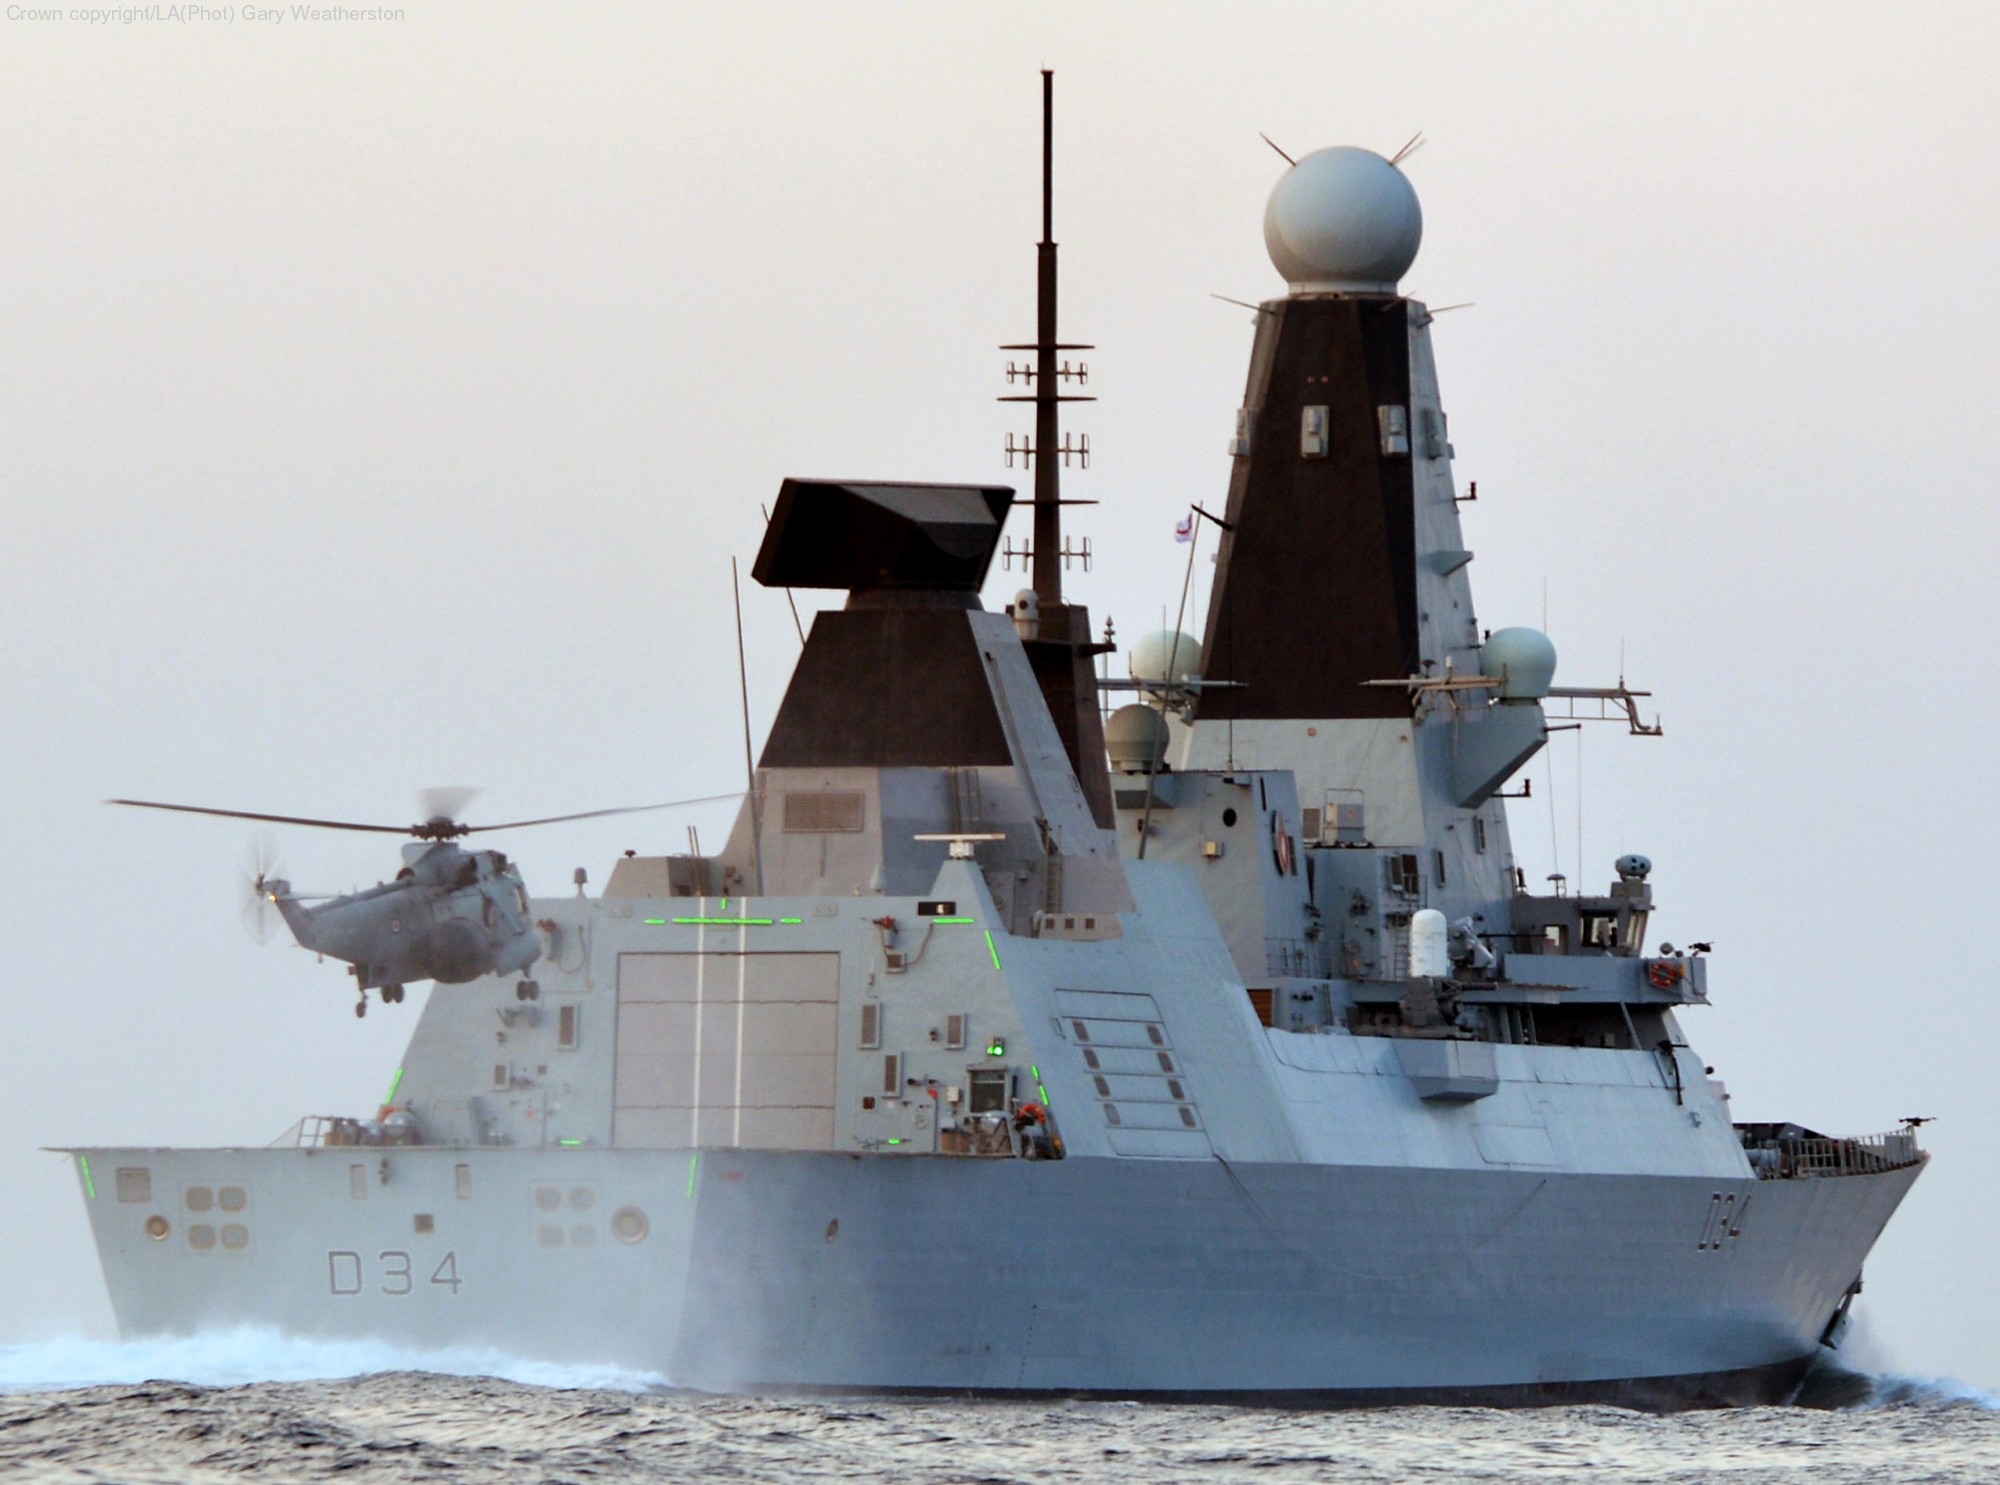 hms diamond d-34 type 45 daring class guided missile destroyer ddg royal navy sea viper paams 12 flight deck helicopter hangar